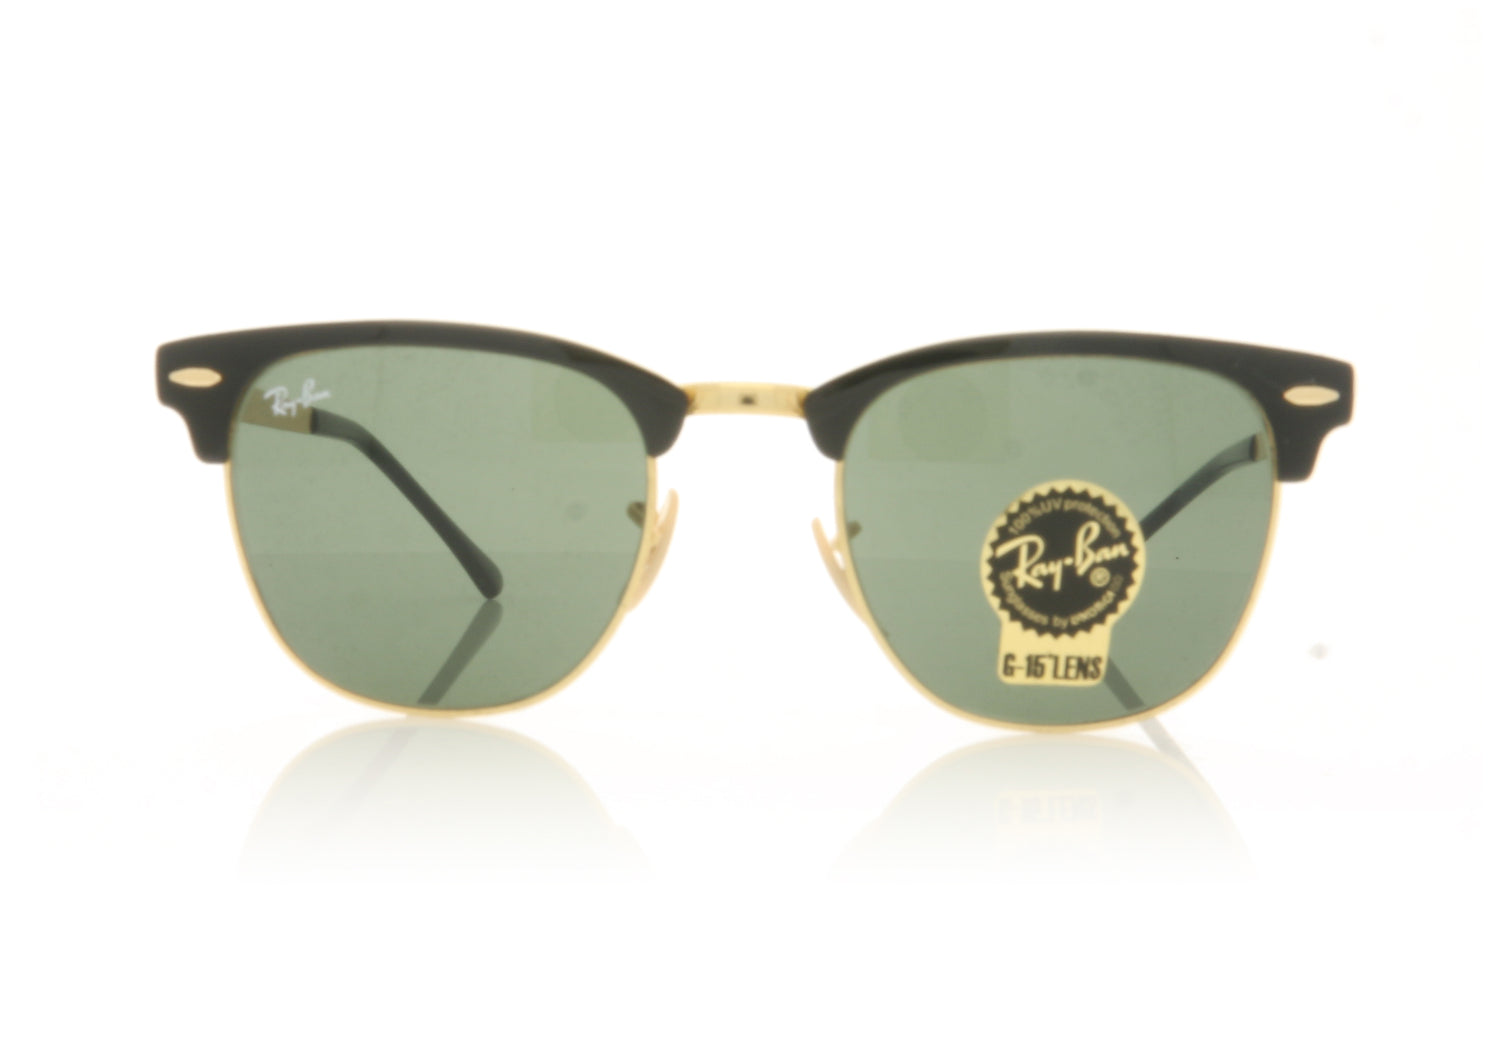 Ray-Ban Clubmaster Metal 187 Gold Top On Black Sunglasses - Front